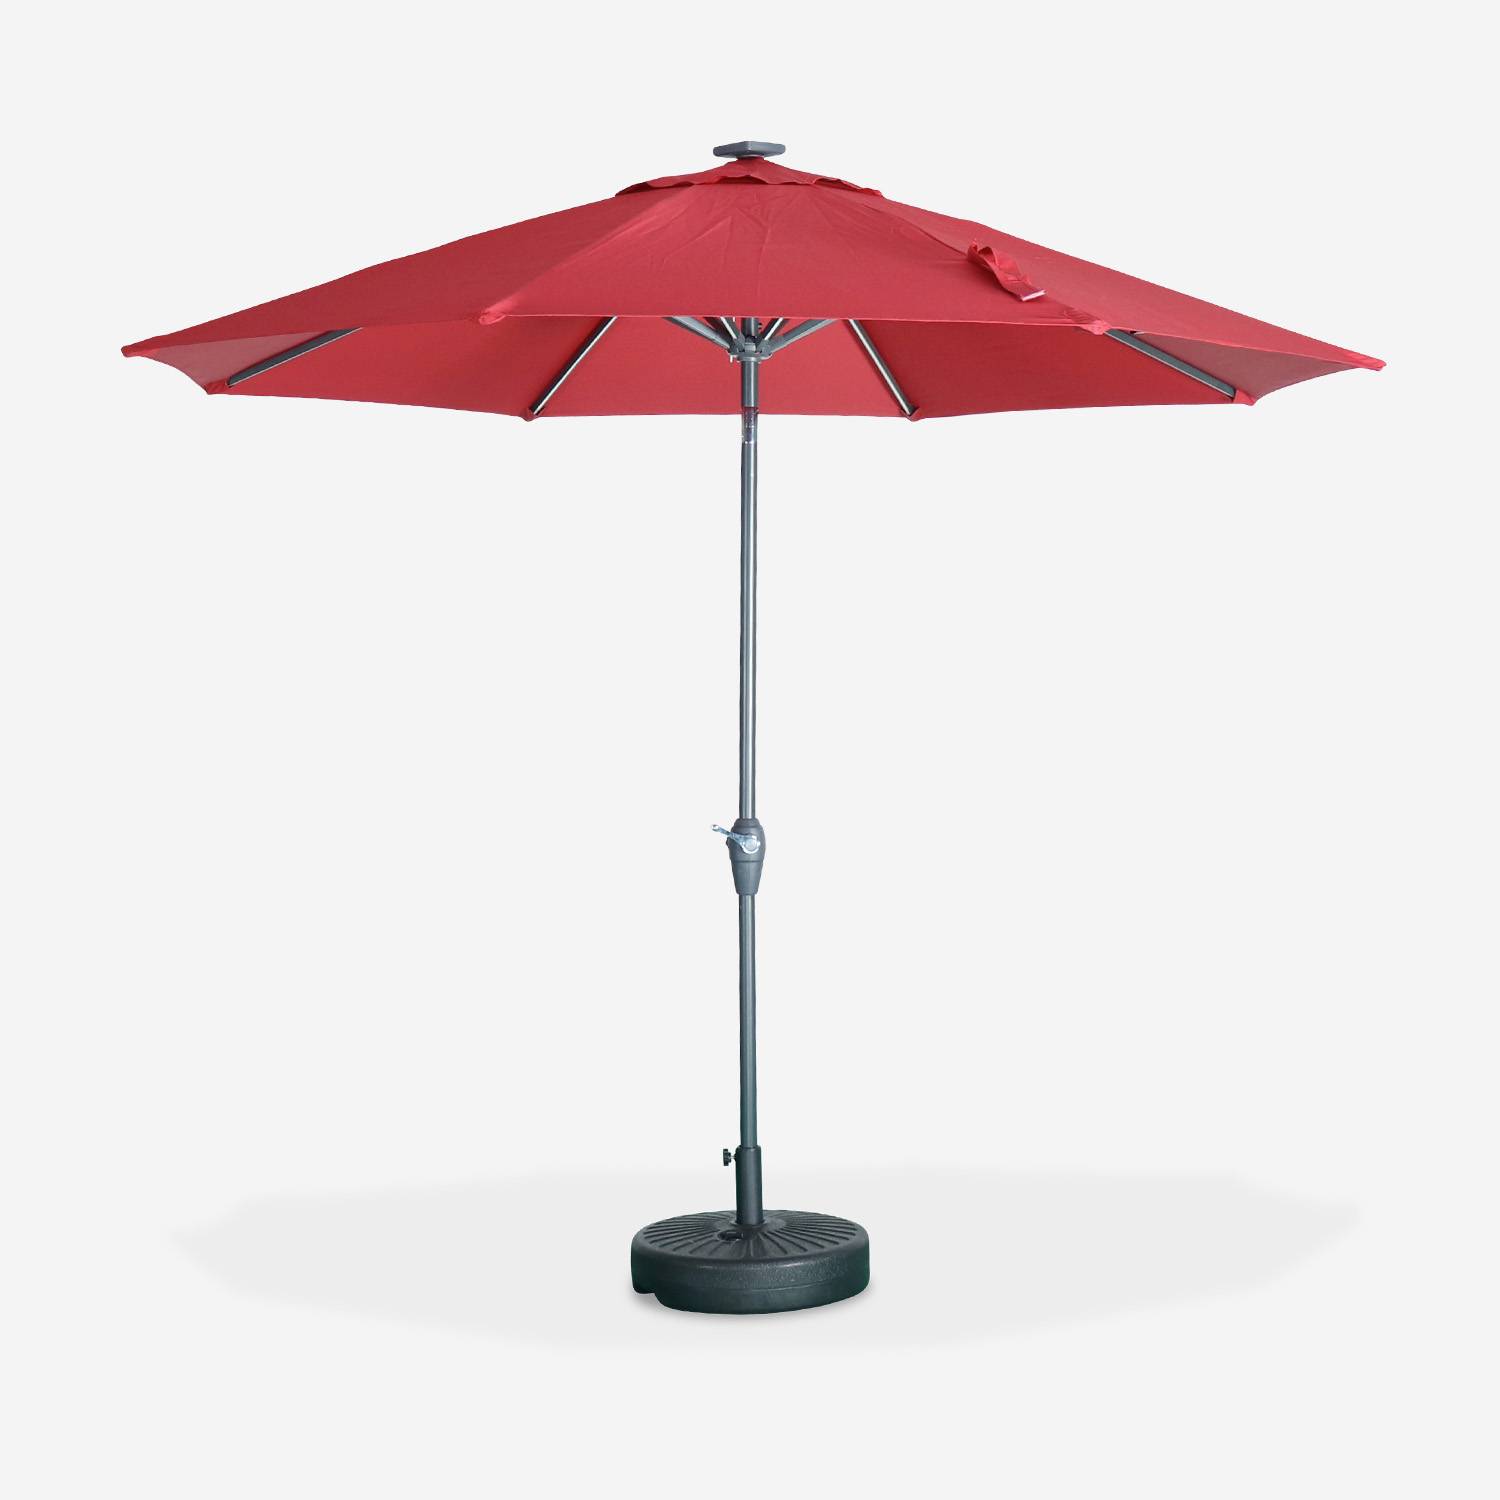 2.7m round centre pole LED parasol - adjustable aluminium central mast and crank handle opening - Helios - Red Photo1